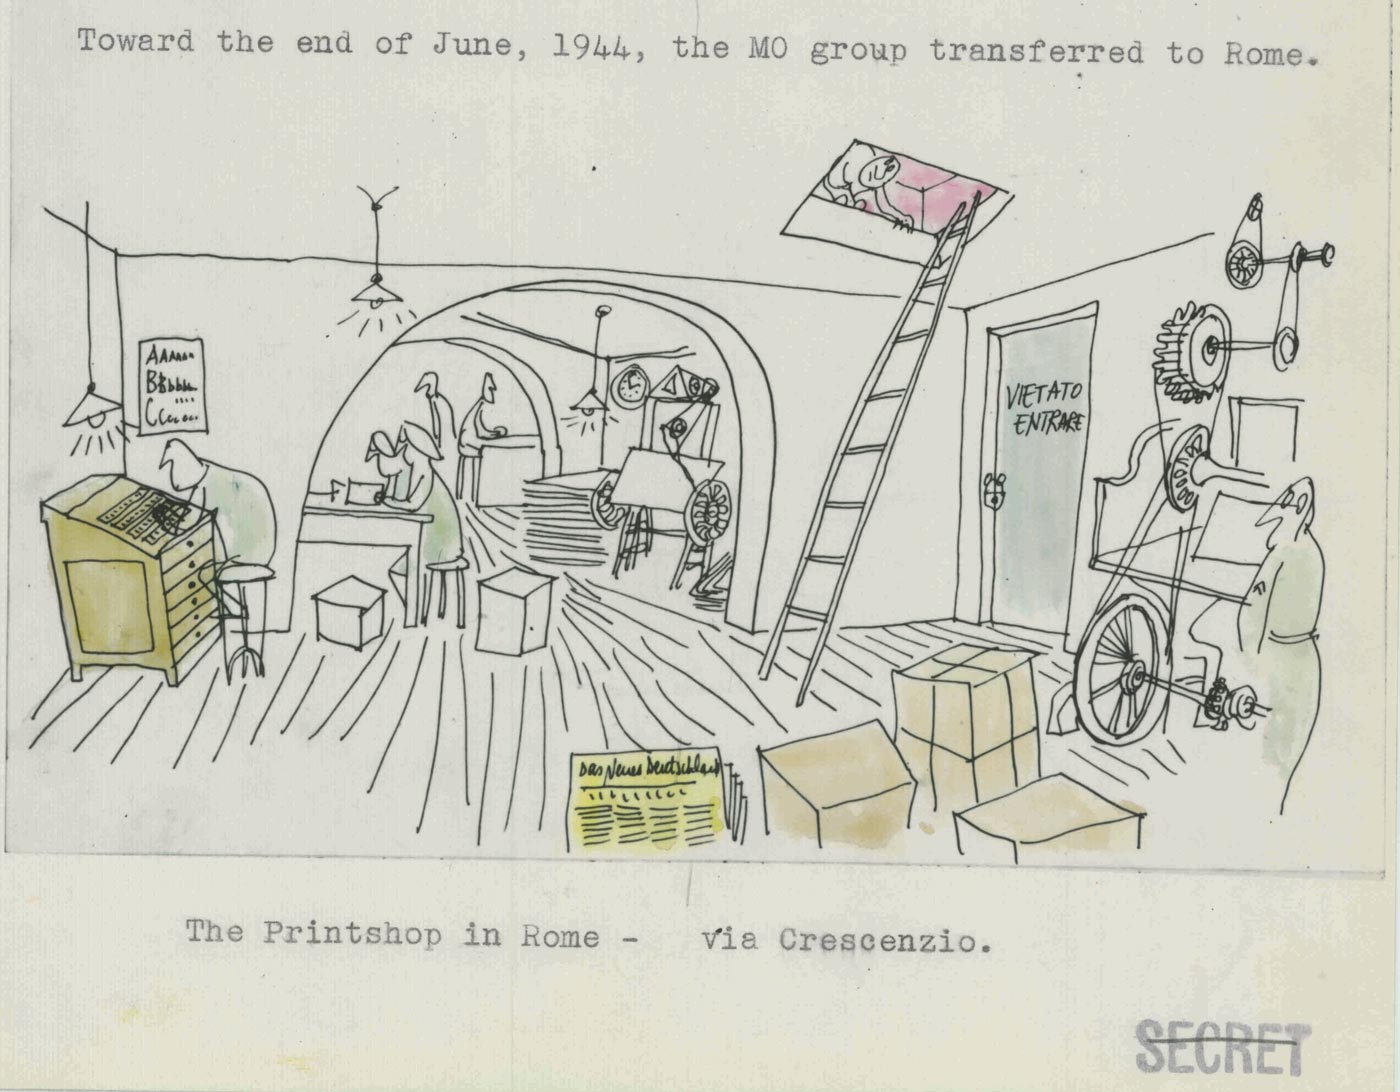 Steinberg’s drawing of the OSS Morale Operations office, Rome, from “Collection of Cartoons Produced by MO Artist Lt. (jg) Saul Steinberg.” NARA, Washington, DC, RG226, E99, Box 40, folder 6.